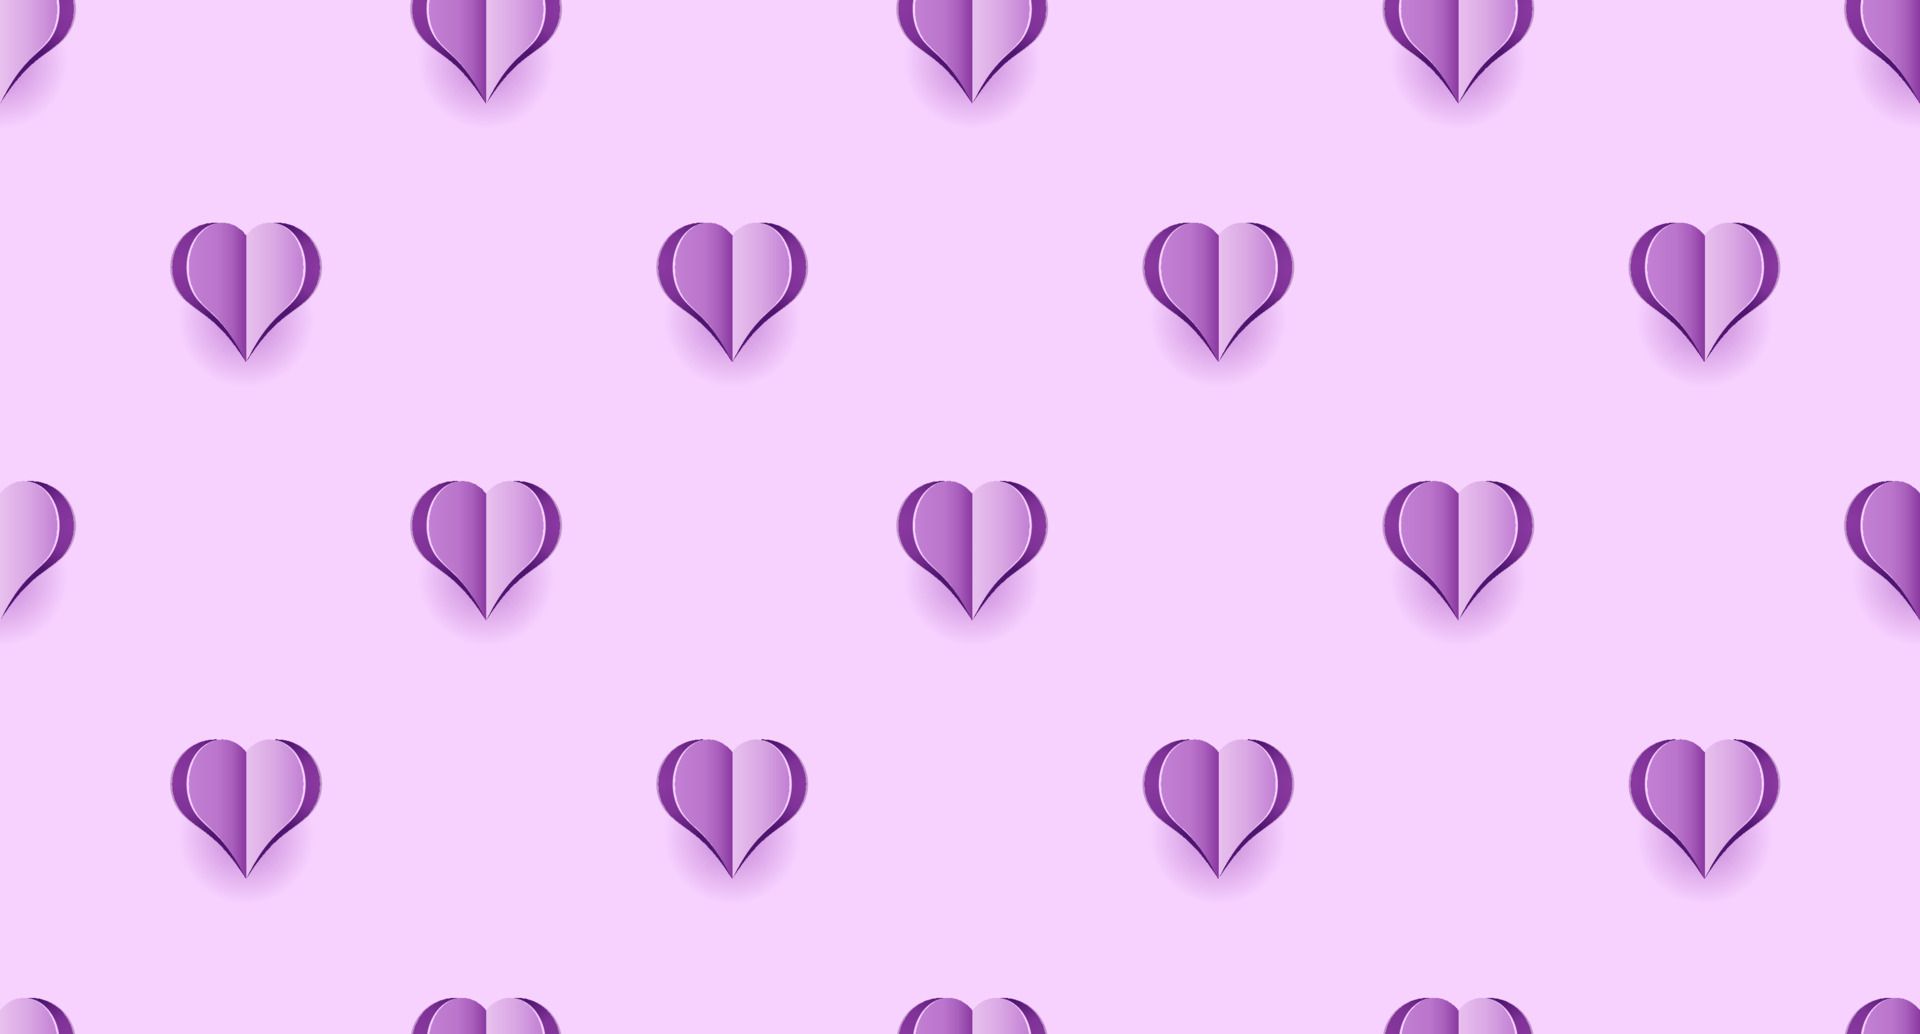 A pattern of purple hearts on pink background - Heart